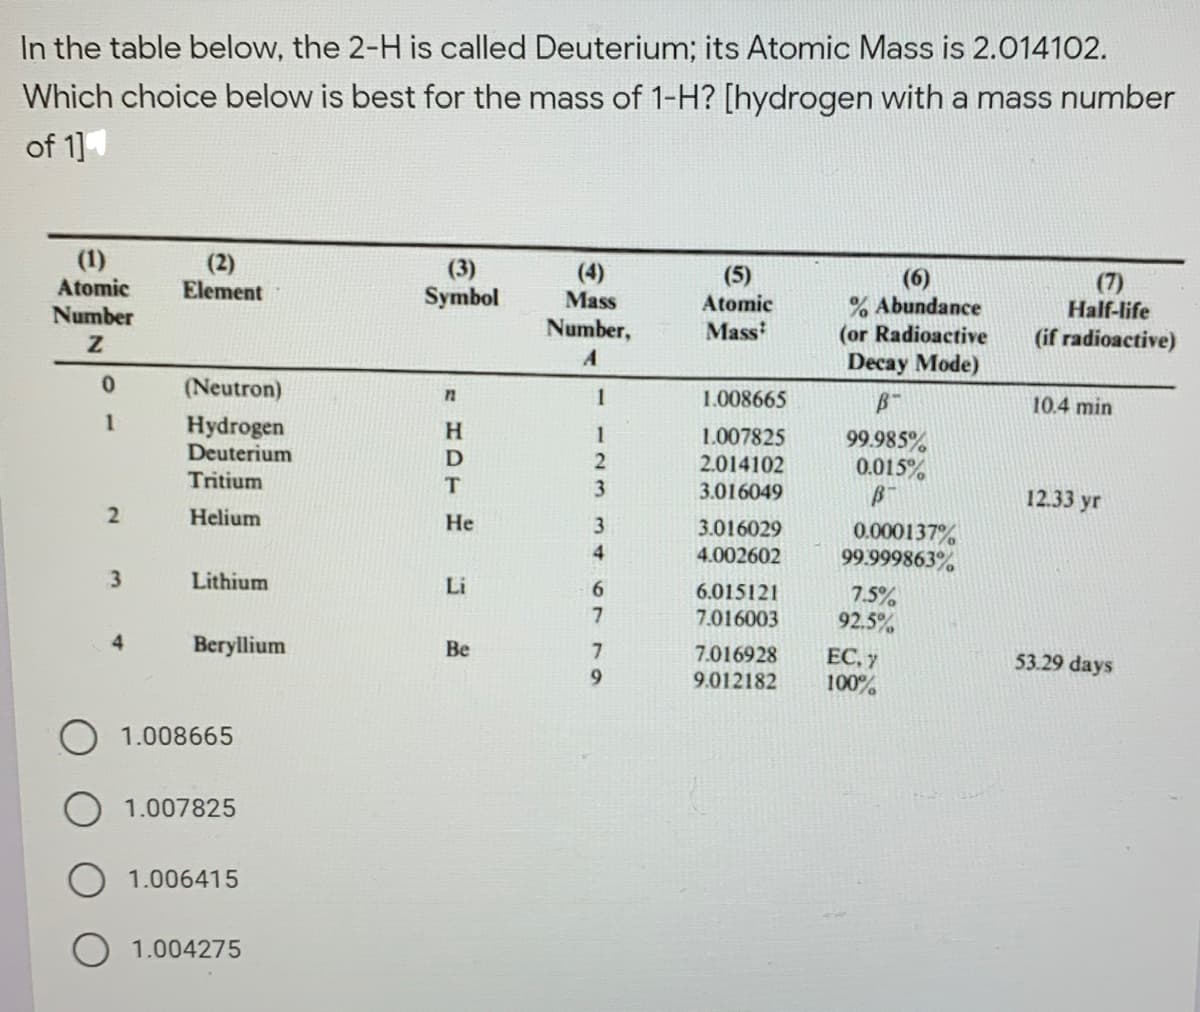 In the table below, the 2-H is called Deuterium; its Atomic Mass is 2.014102.
Which choice below is best for the mass of 1-H? [hydrogen with a mass number
of 1]
(1)
Atomic
Number
(2)
Element
(3)
Symbol
(4)
Mass
(5)
Atomic
(6)
% Abundance
(or Radioactive
Decay Mode)
(7)
Half-life
Number,
Mass
(if radioactive)
(Neutron)
1
1.008665
10.4 min
1
Hydrogen
Deuterium
H.
1.007825
2.014102
3.016049
99.985%
0.015%
Tritium
3.
12.33 yr
Helium
Не
3
3.016029
0.000137%
99.999863%
4.
4.002602
3.
Lithium
Li
6.
6.015121
7.016003
7.5%
92.5%
4.
Beryllium
Be
7.016928
9.012182
EC, 7
100%
53.29 days
9.
1.008665
1.007825
1.006415
O 1.004275
